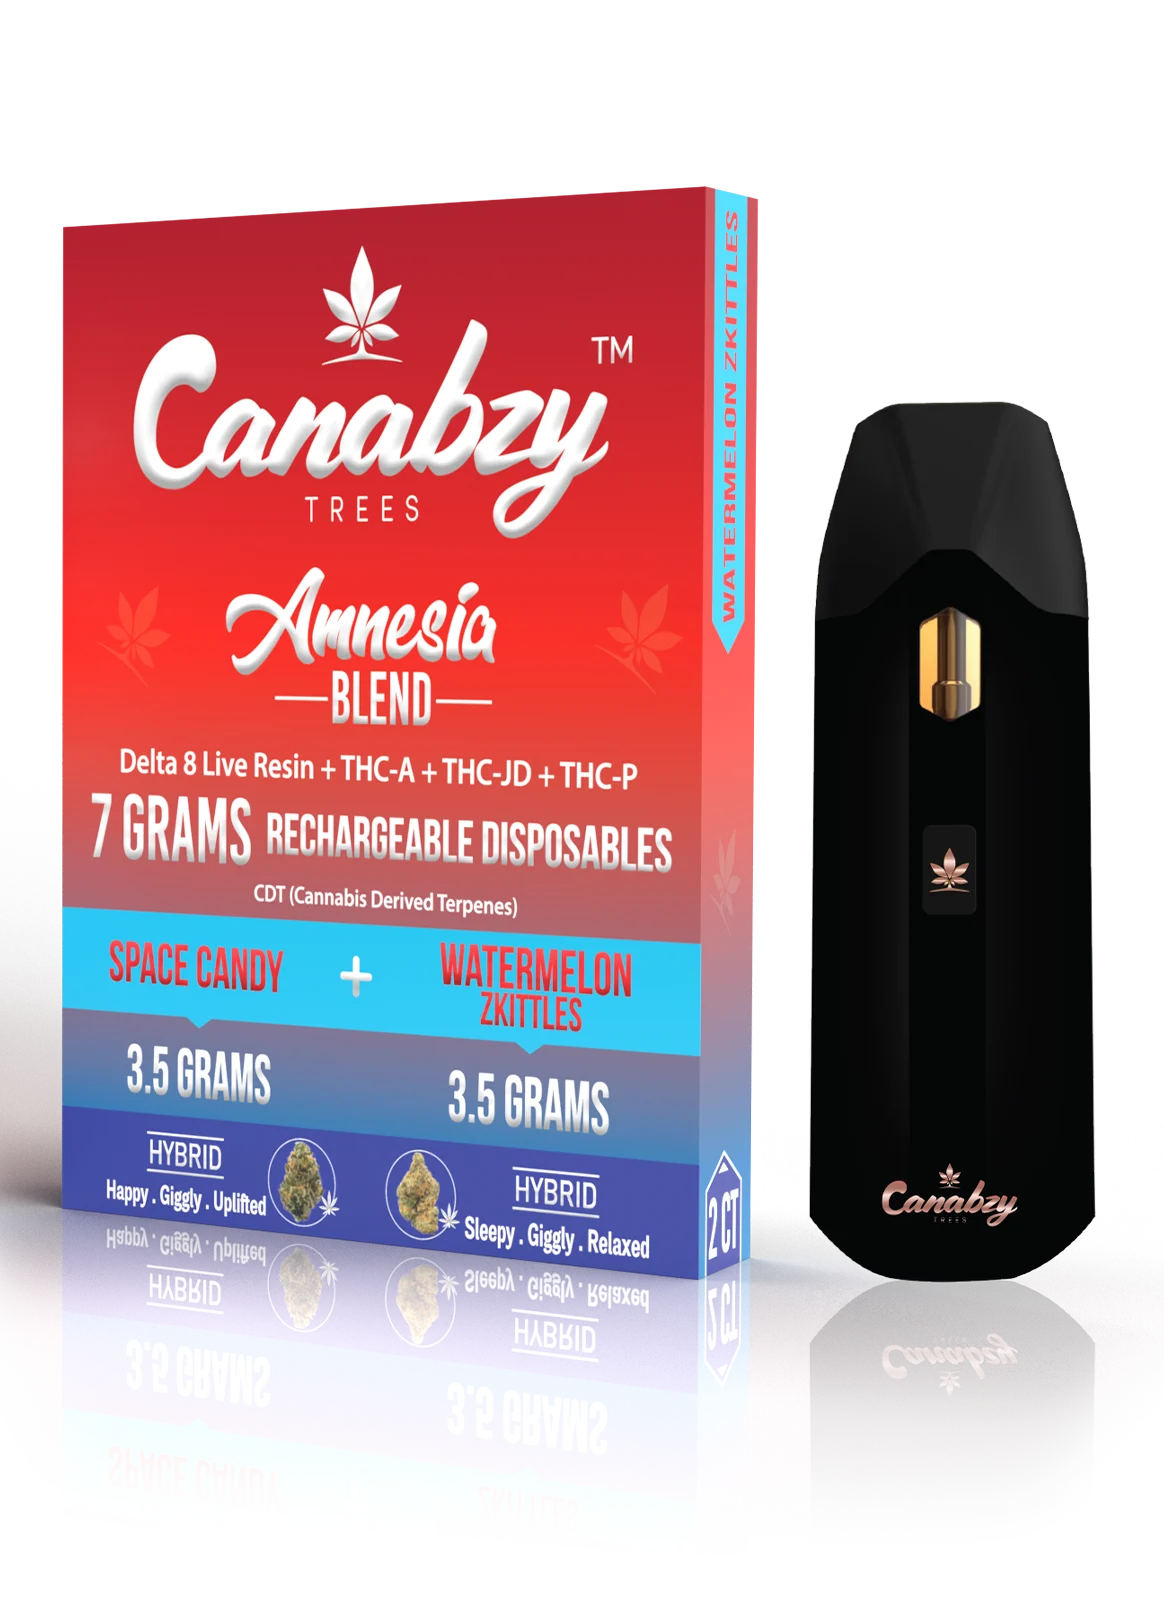 Canabzy Disposable – Amnesia Blend – Space Candy + Watermelon Zkittles